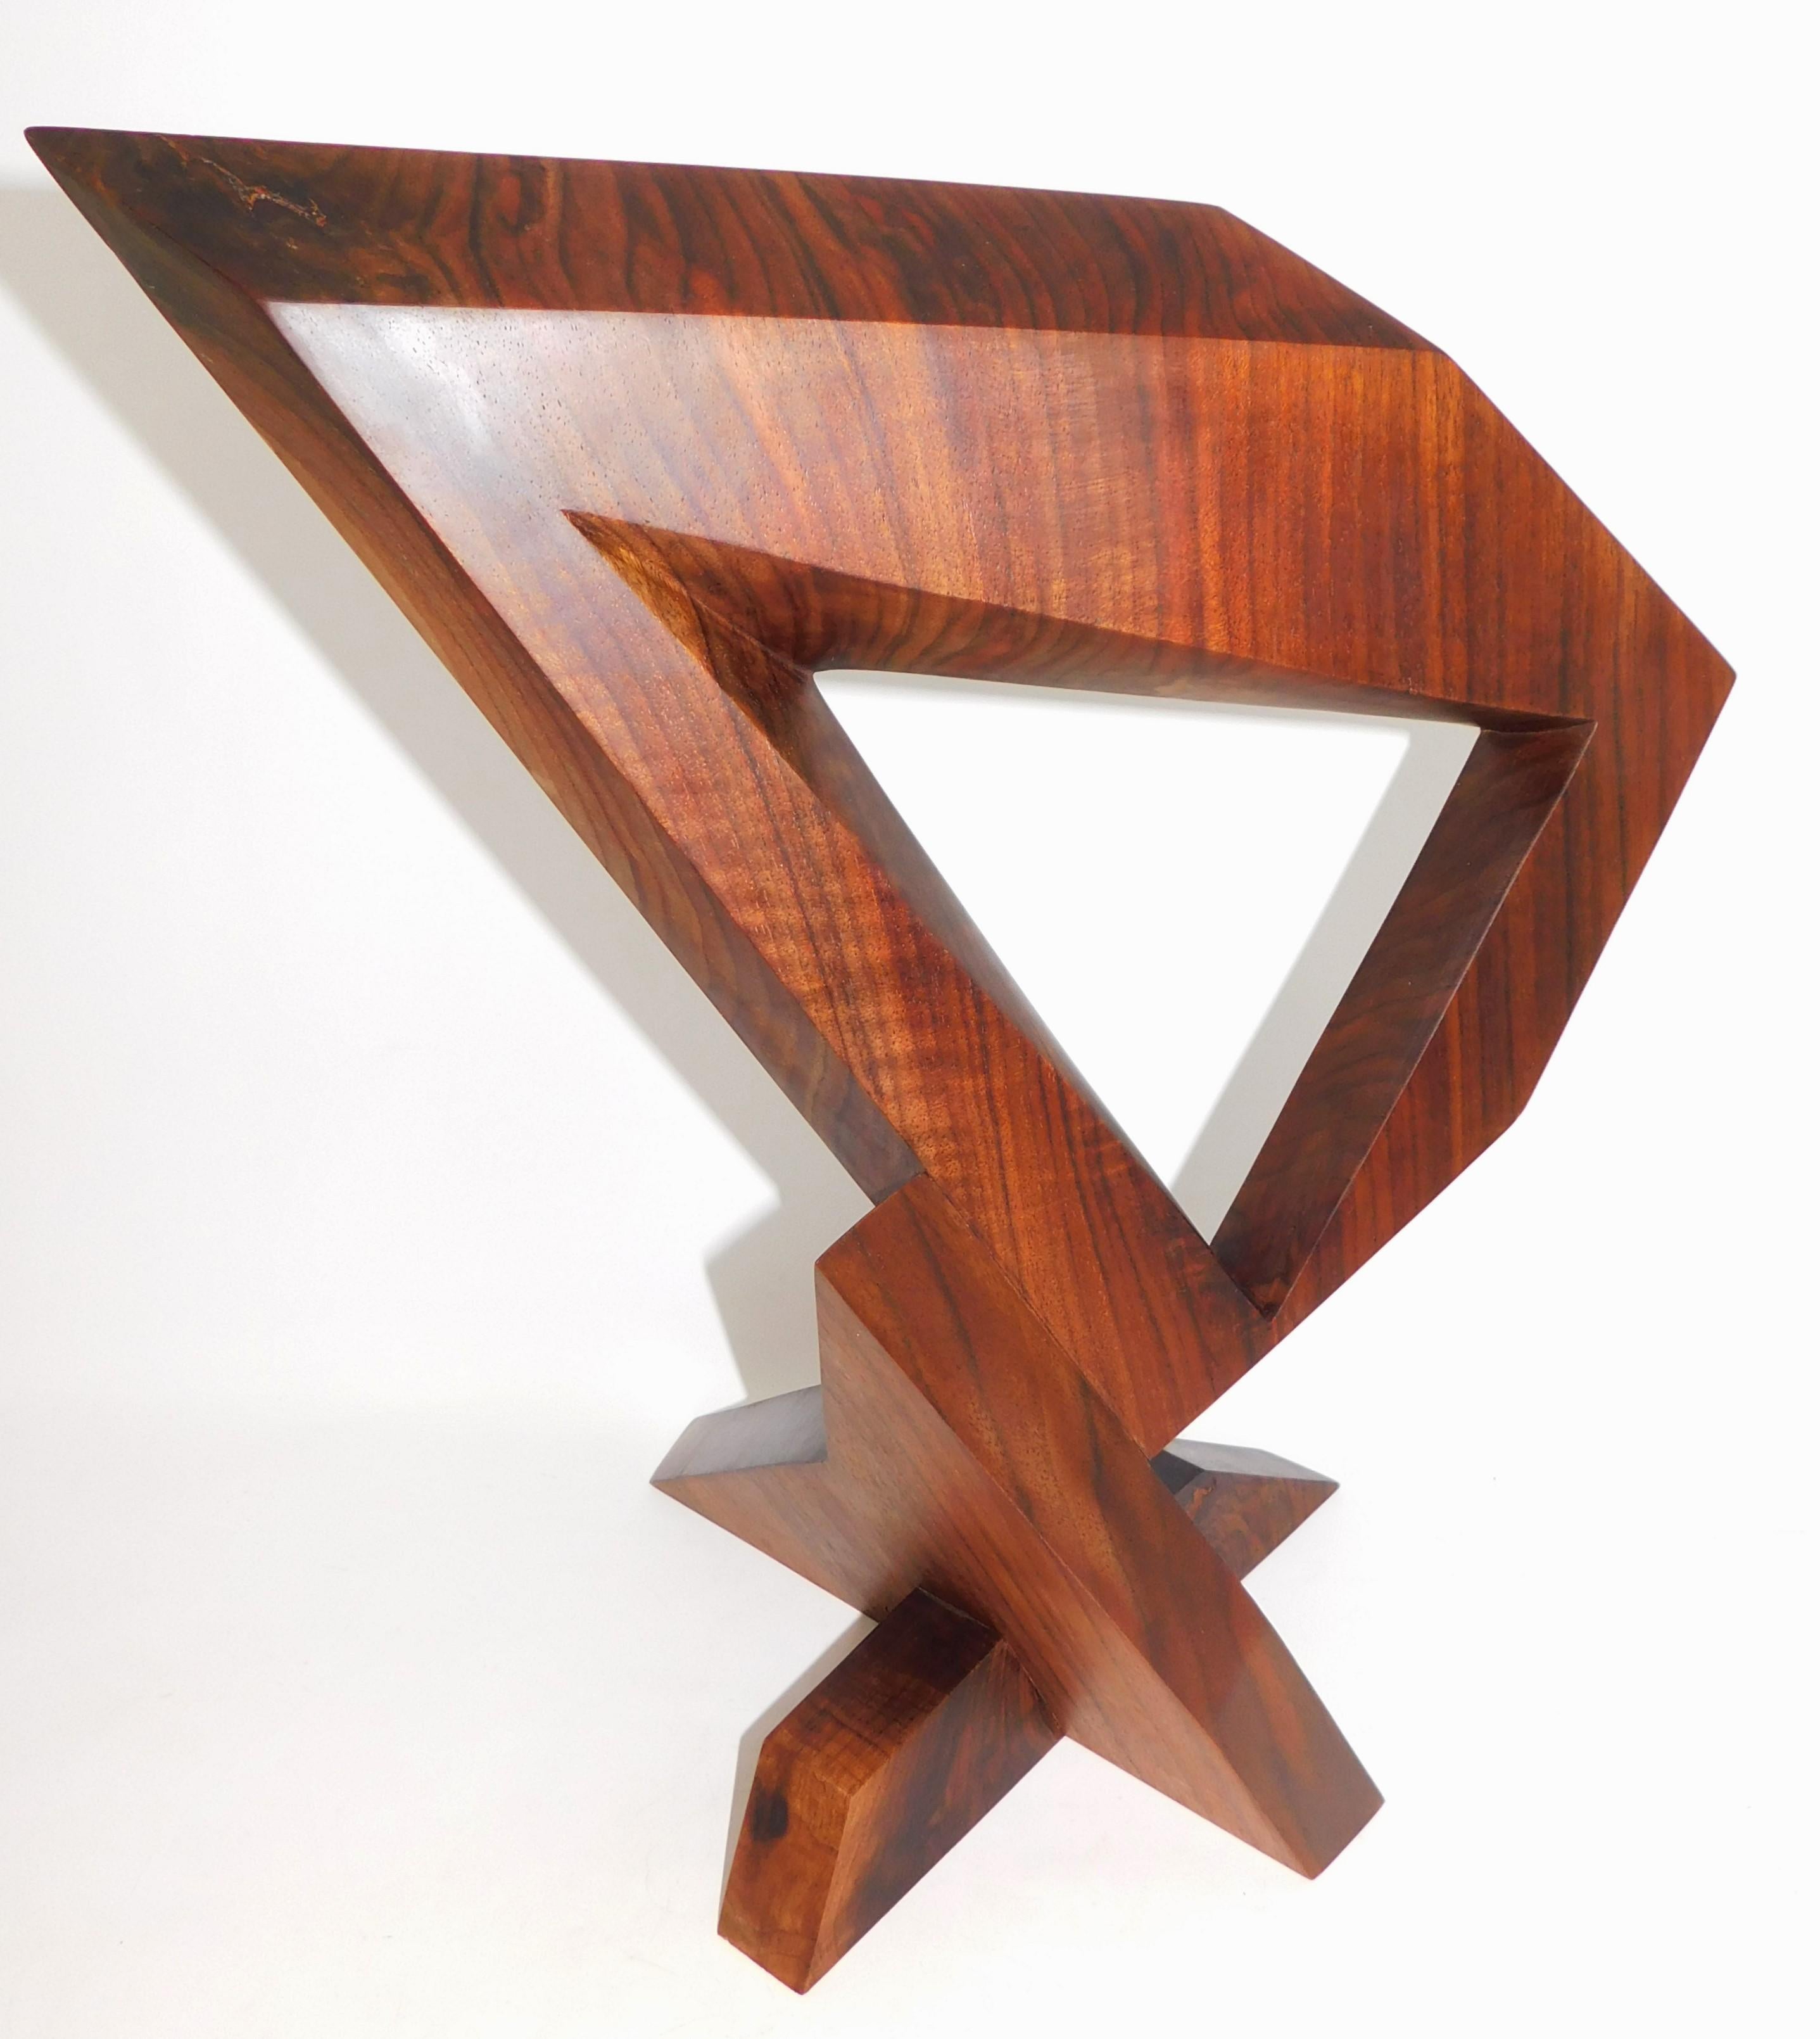 Contemporary Modern Abstract Constructivist Walnut Wood Sculpture Signed Czeslaw Budny  For Sale